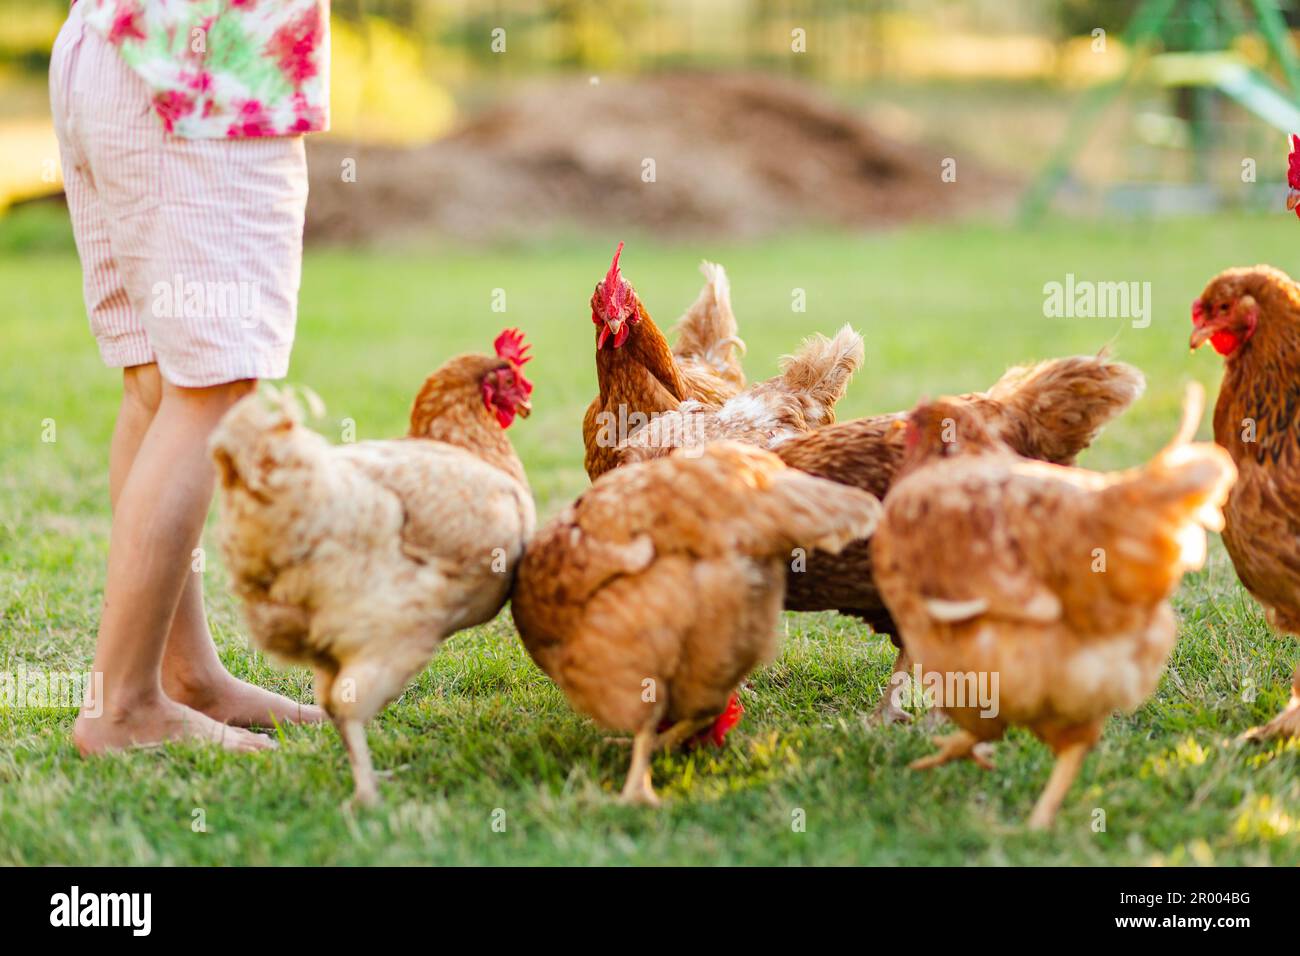 Country kid standing with flock of brown hens in backyard on farm Stock Photo